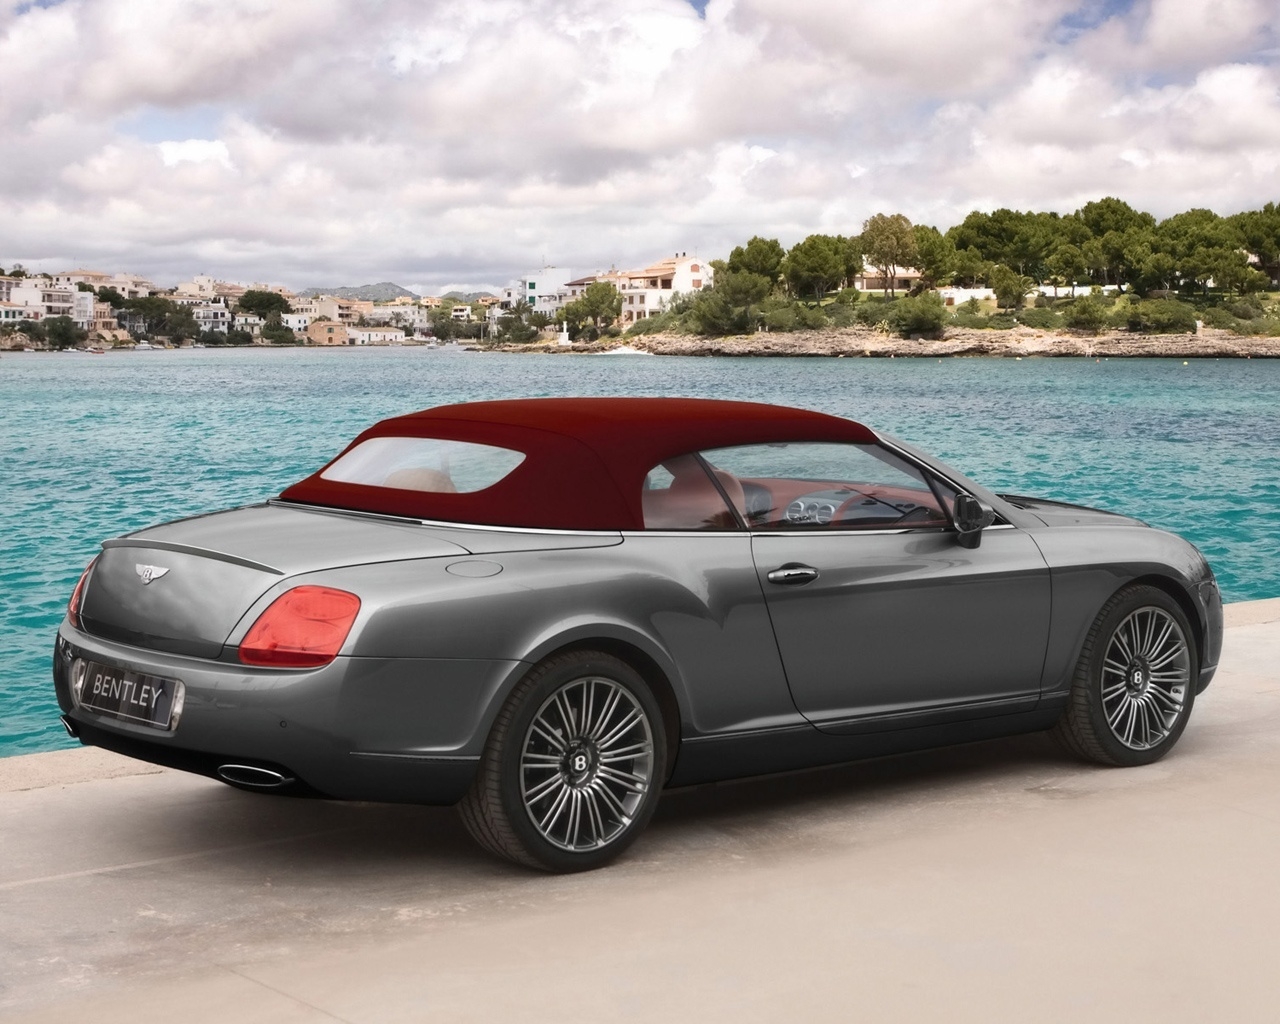 Bentley Continental GTC 2009 for 1280 x 1024 resolution